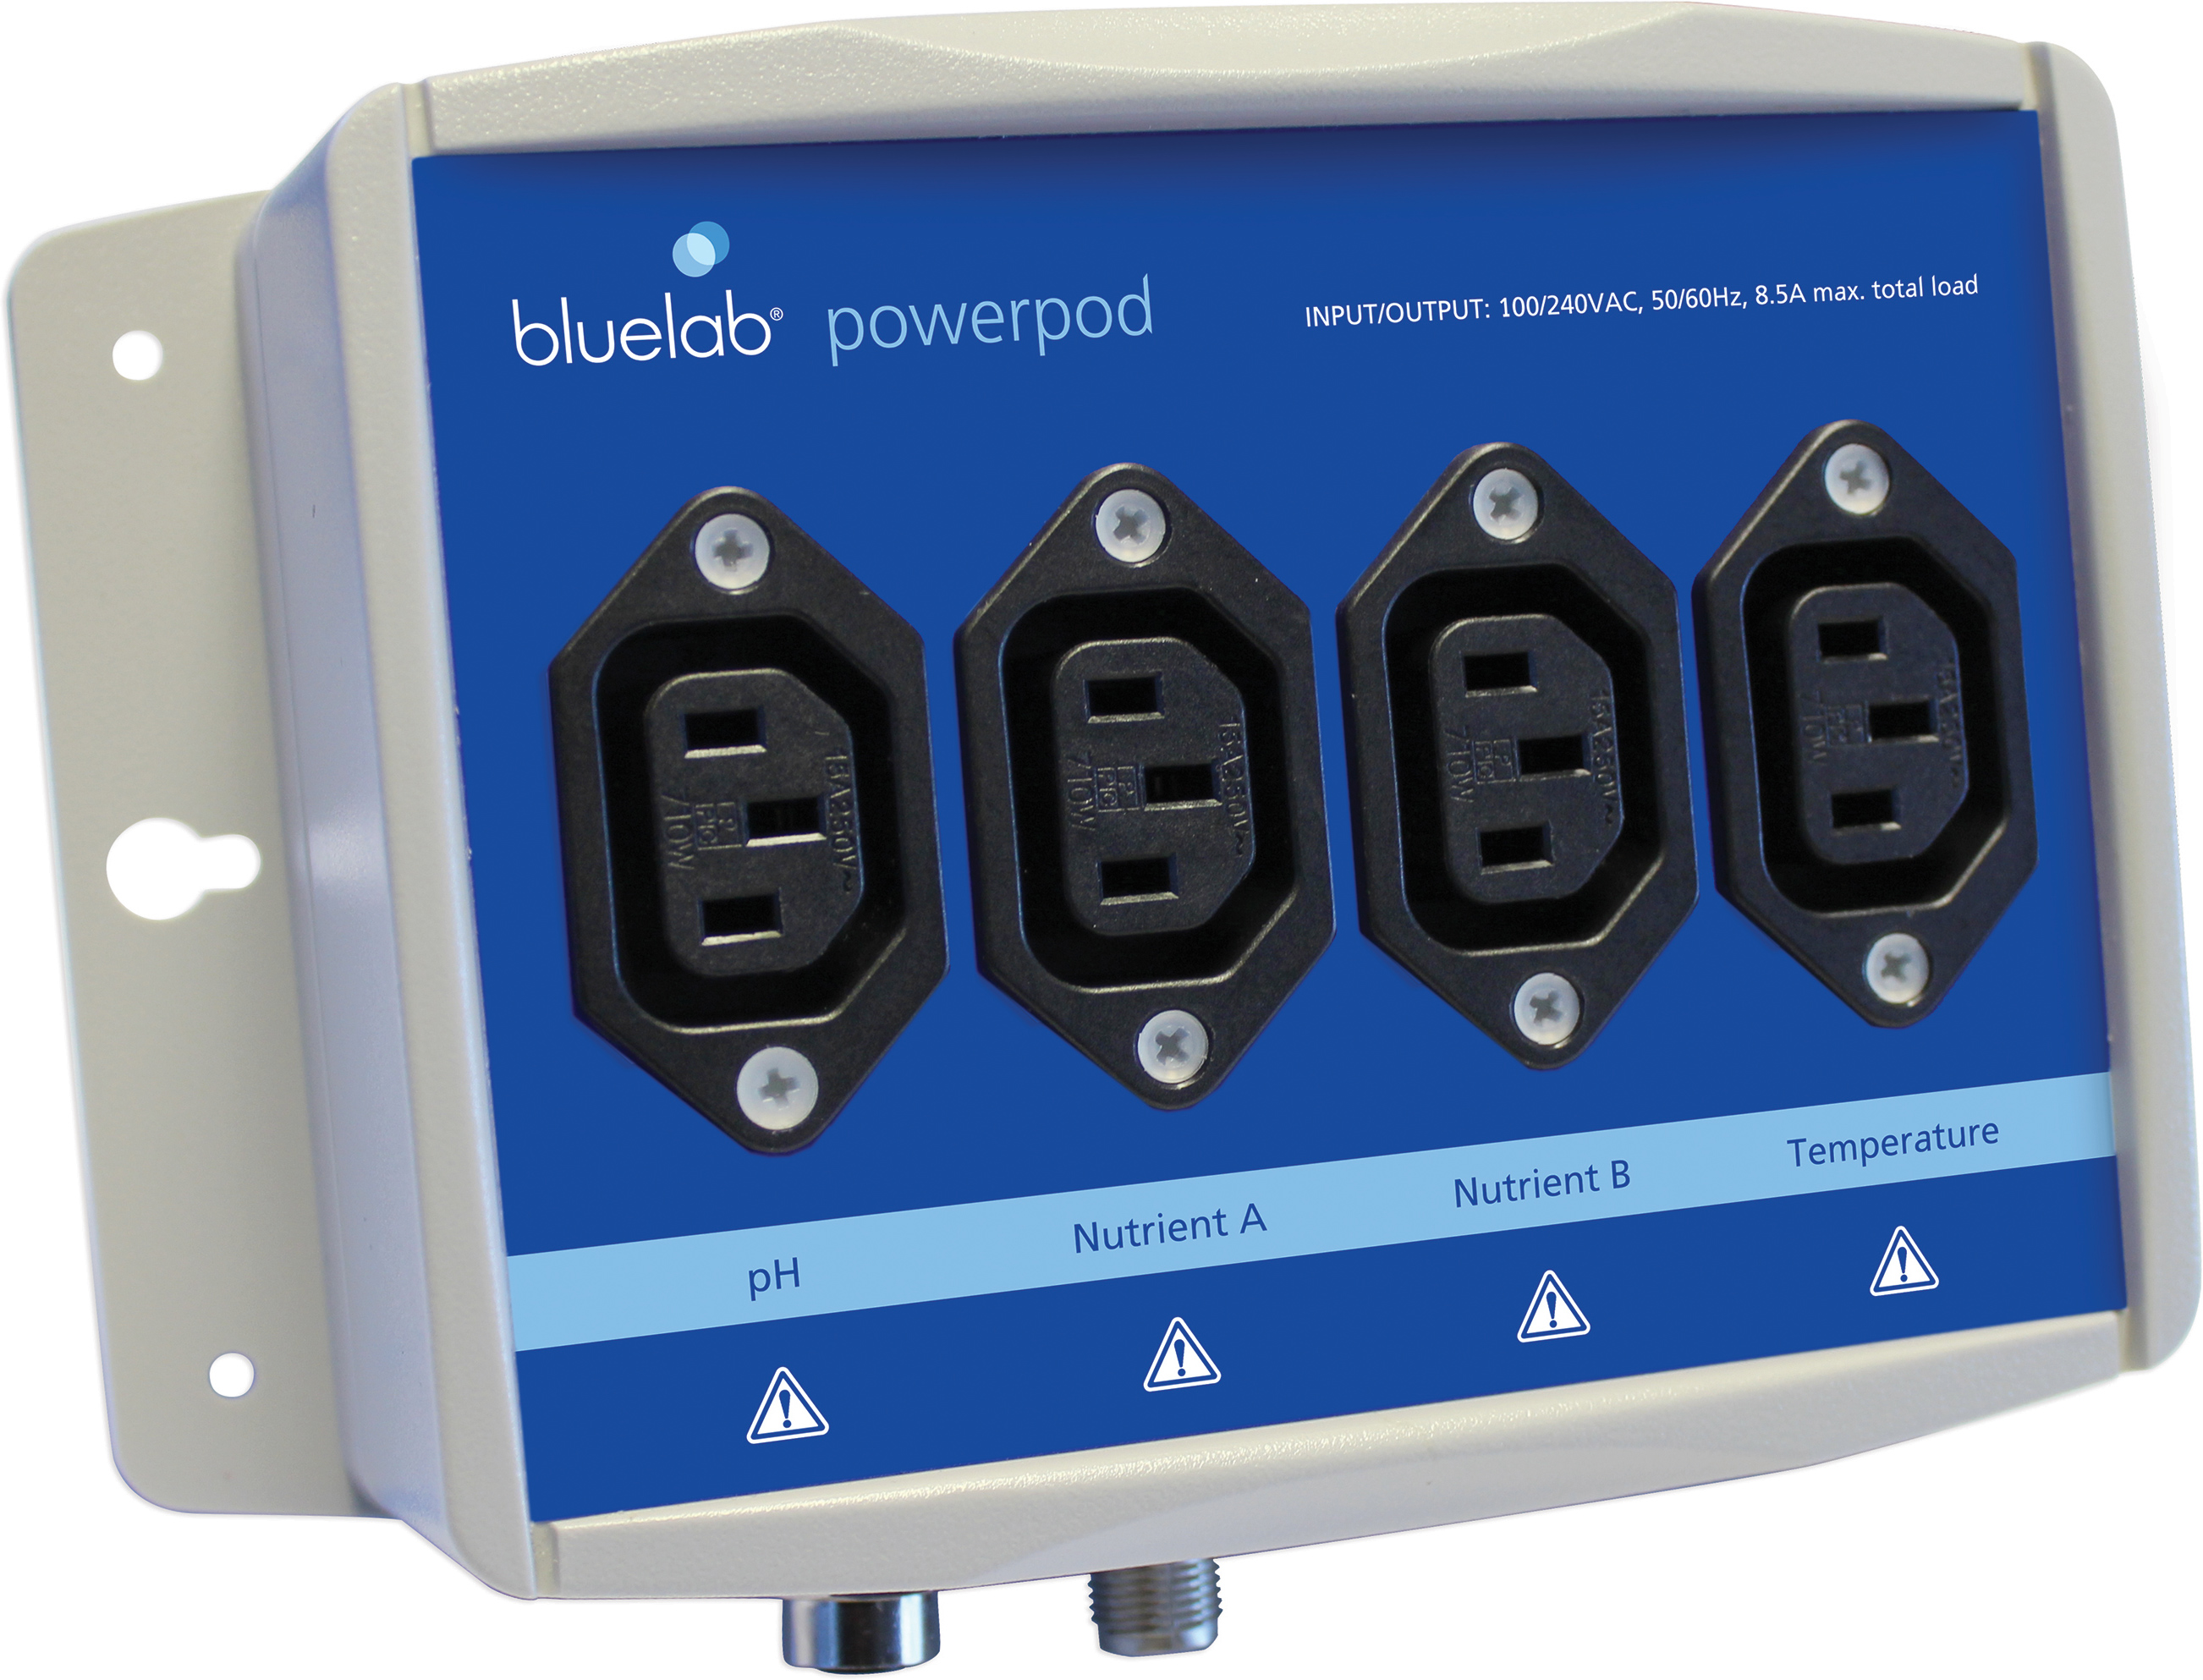 Picture for Bluelab PowerPod